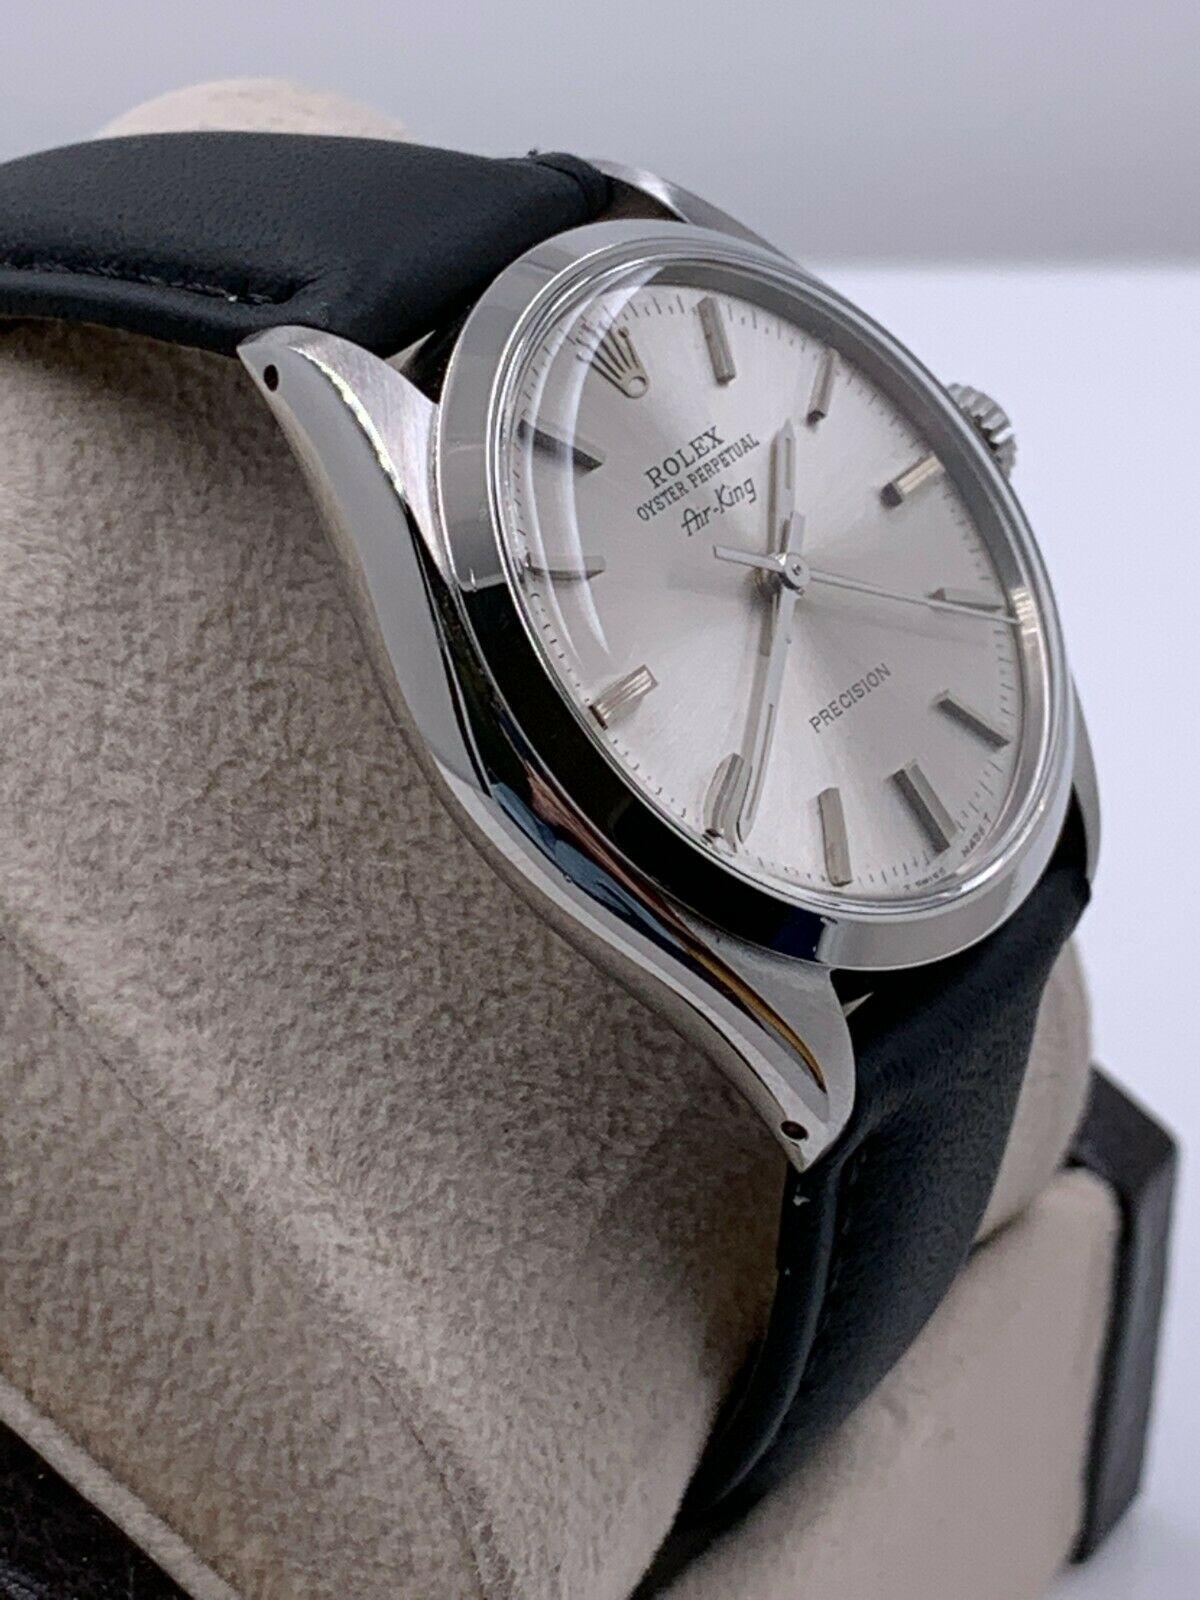 Style Number: 5500

 

Serial: 6292***

 

Model: Air King

 

Case Material: Stainless Steel

 

Band: Custom Leather Band

 

Bezel: Stainless Steel

 

Dial: Silver

 

Face: Acrylic

 

Case Size: 34mm

 

Includes: 

-Elegant Watch